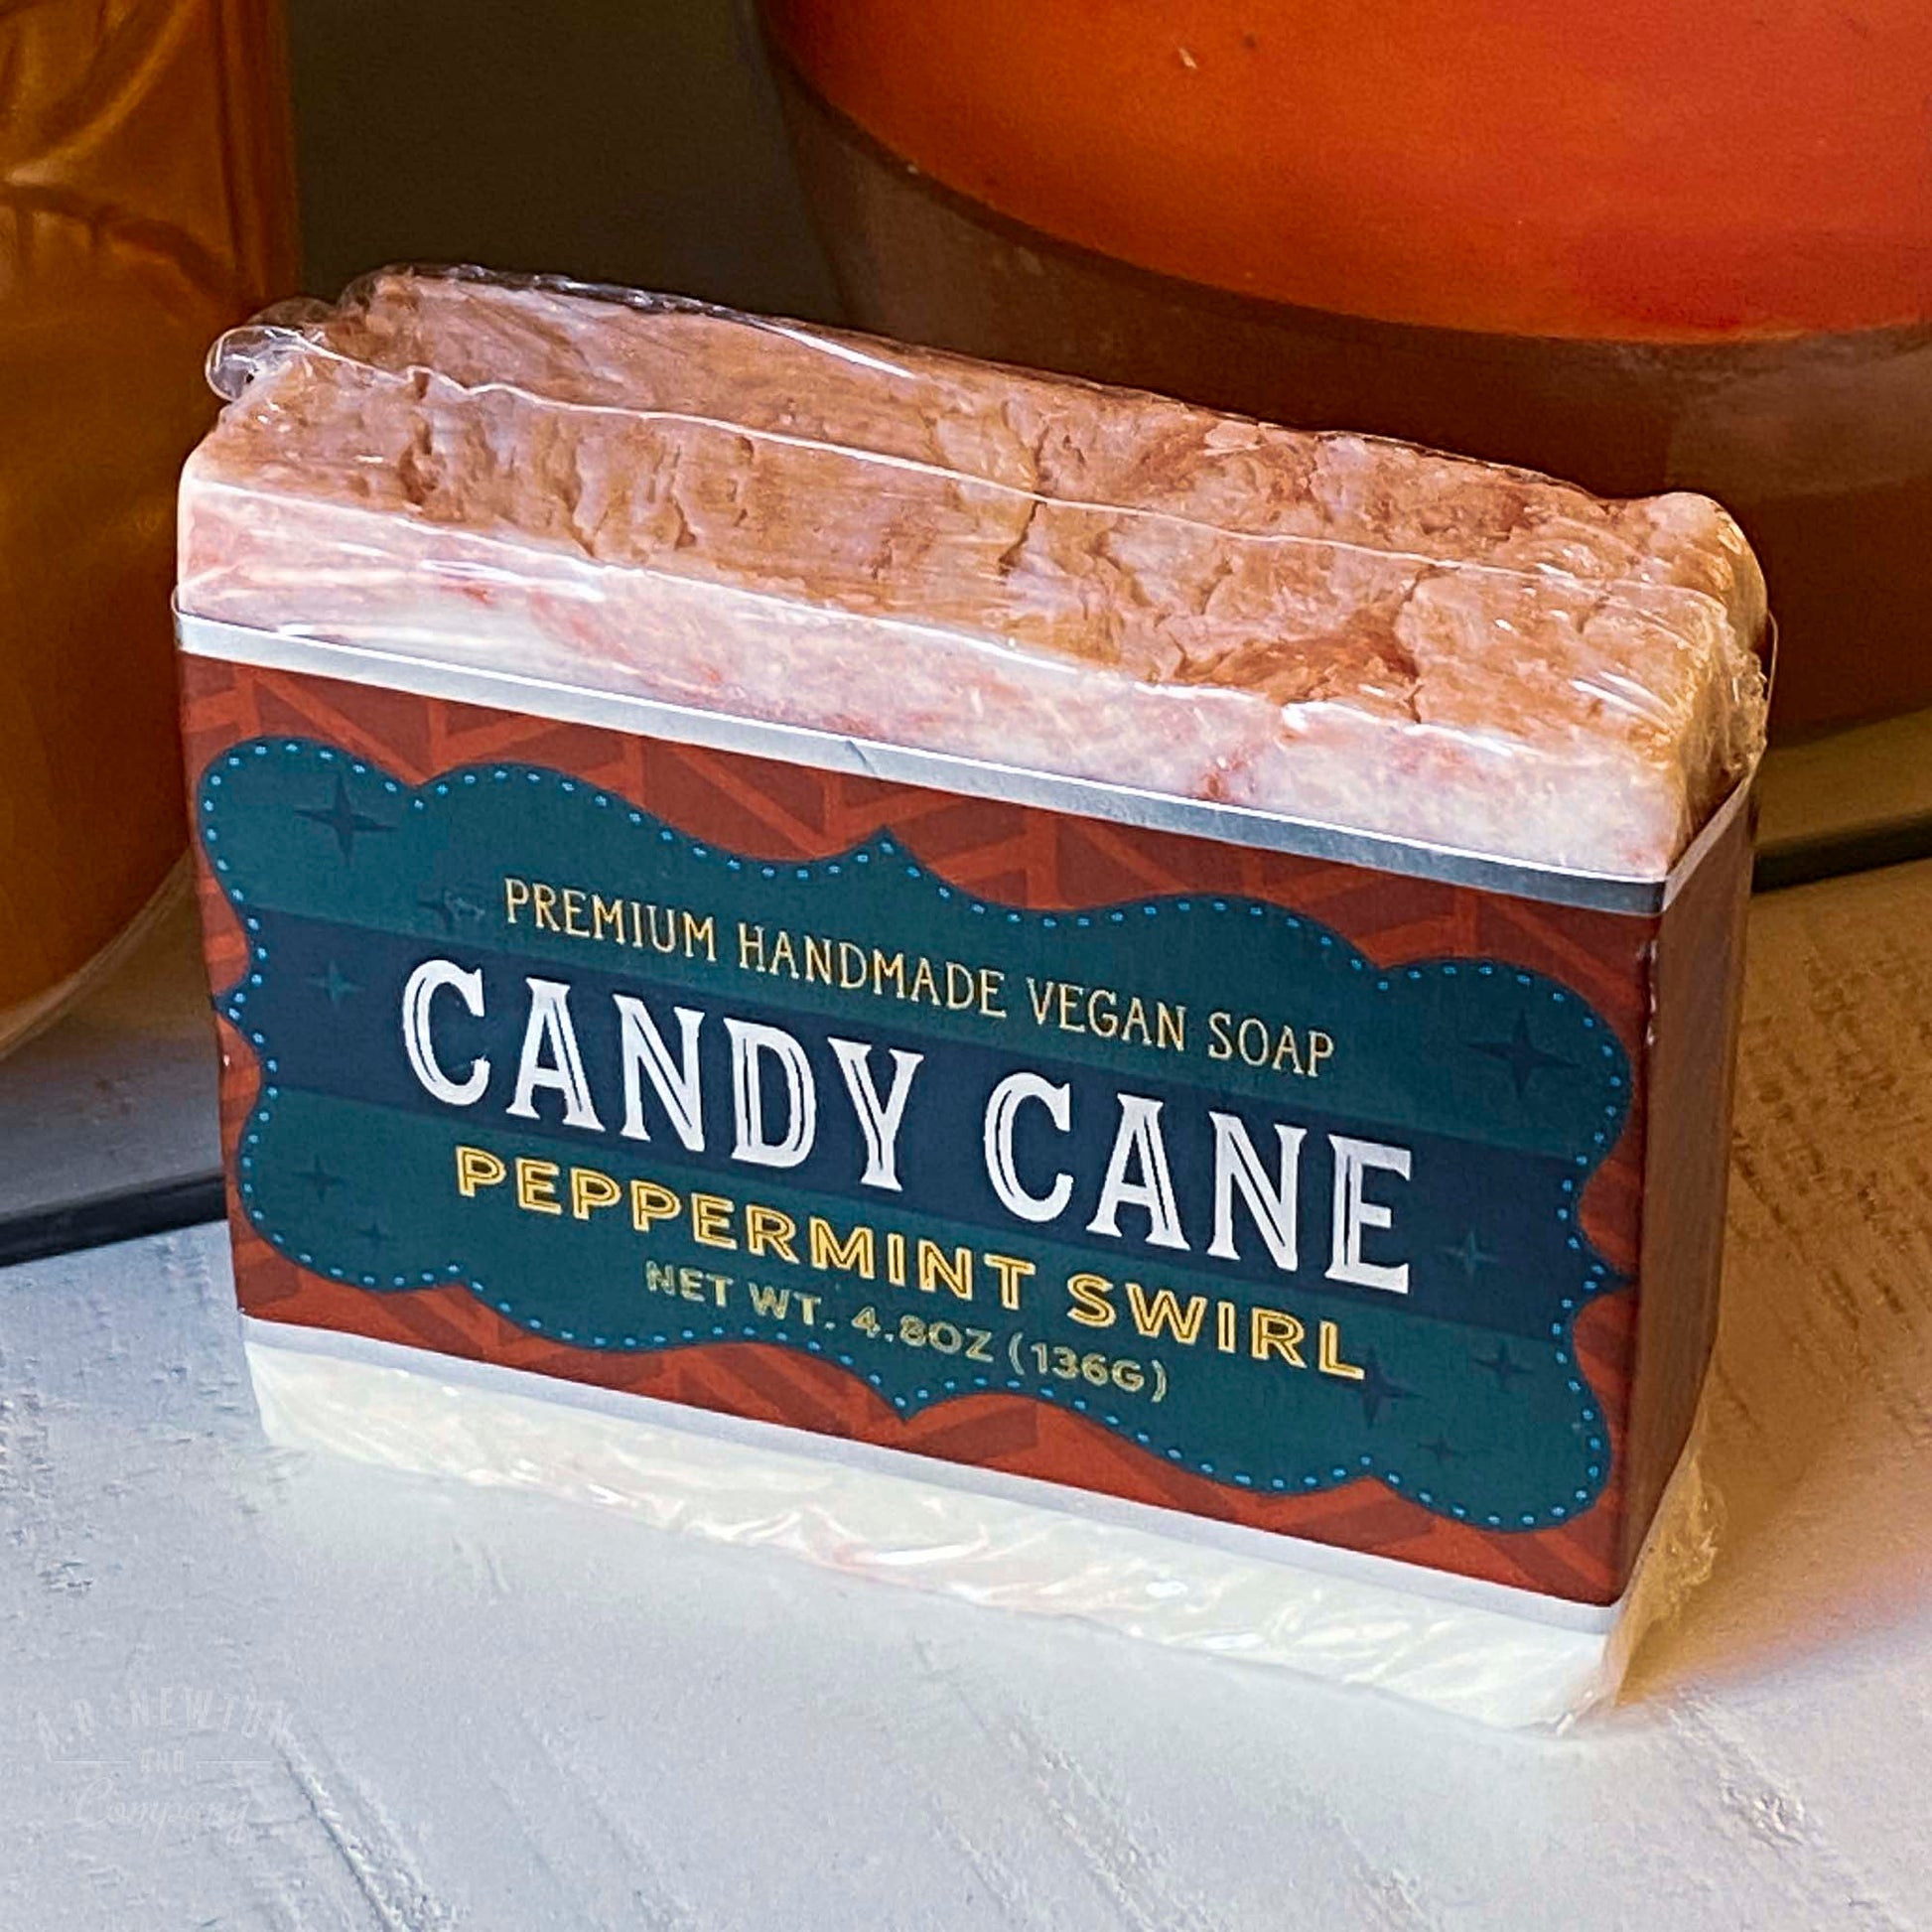 Candy Cane Holiday Scented Bar of Soap | Handmade Premium Vegan Soap - A. B. Newton and Company